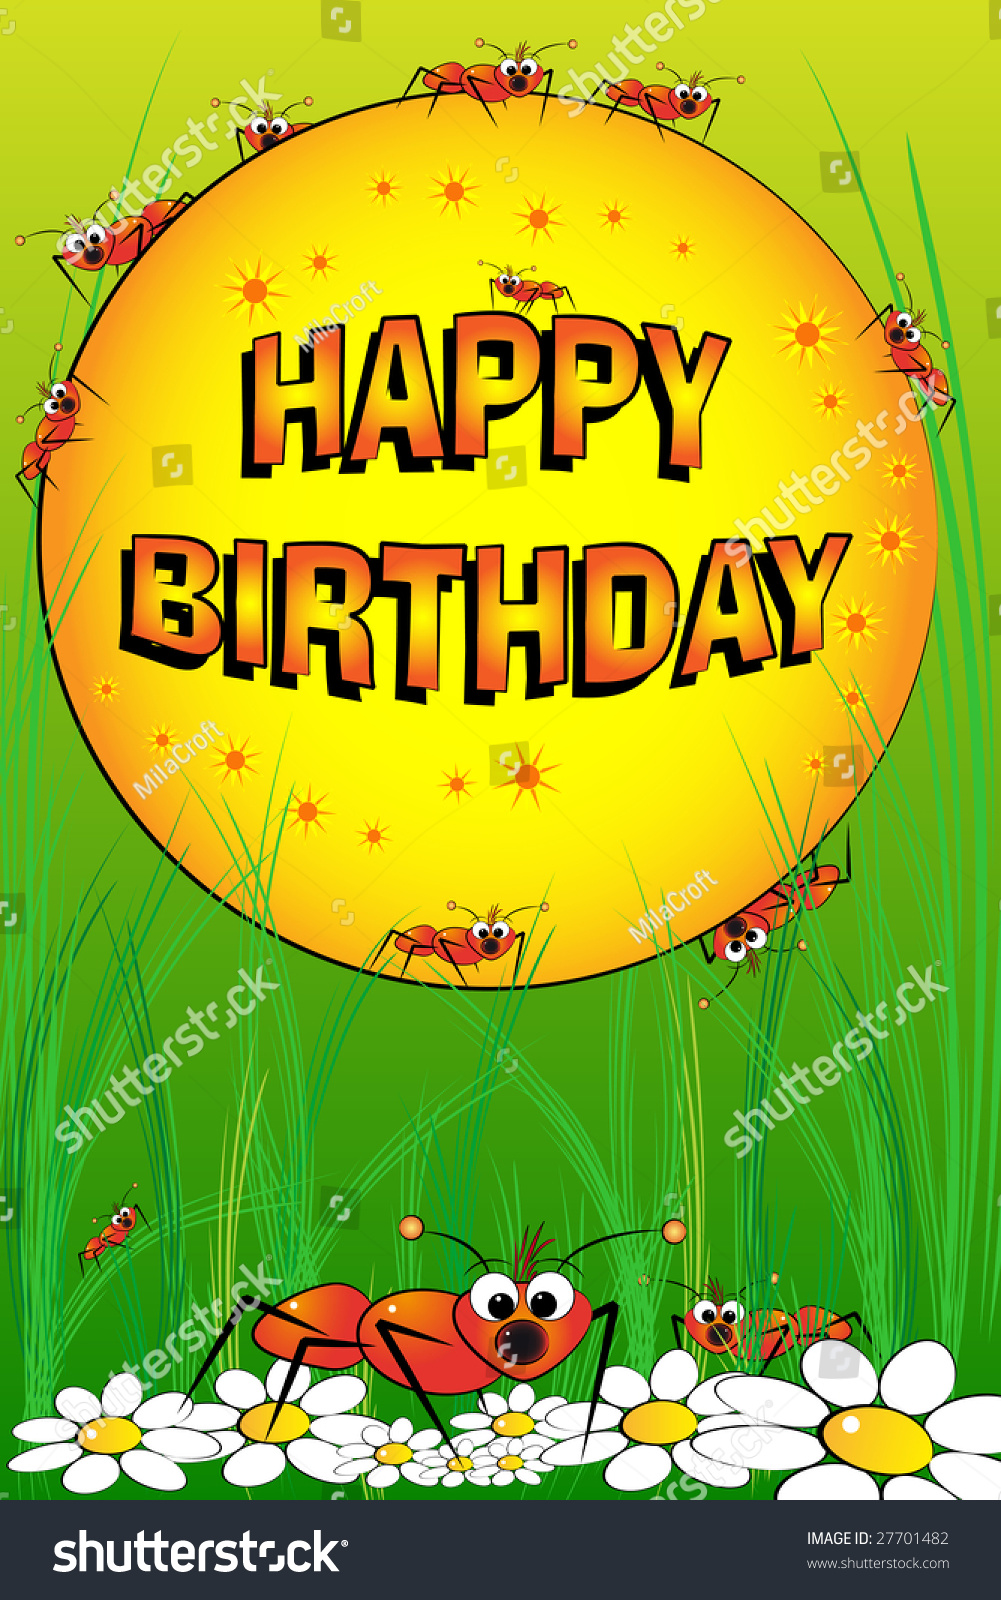 Ants And Flowers - Birthday Card For Kids Stock Photo 27701482 ...